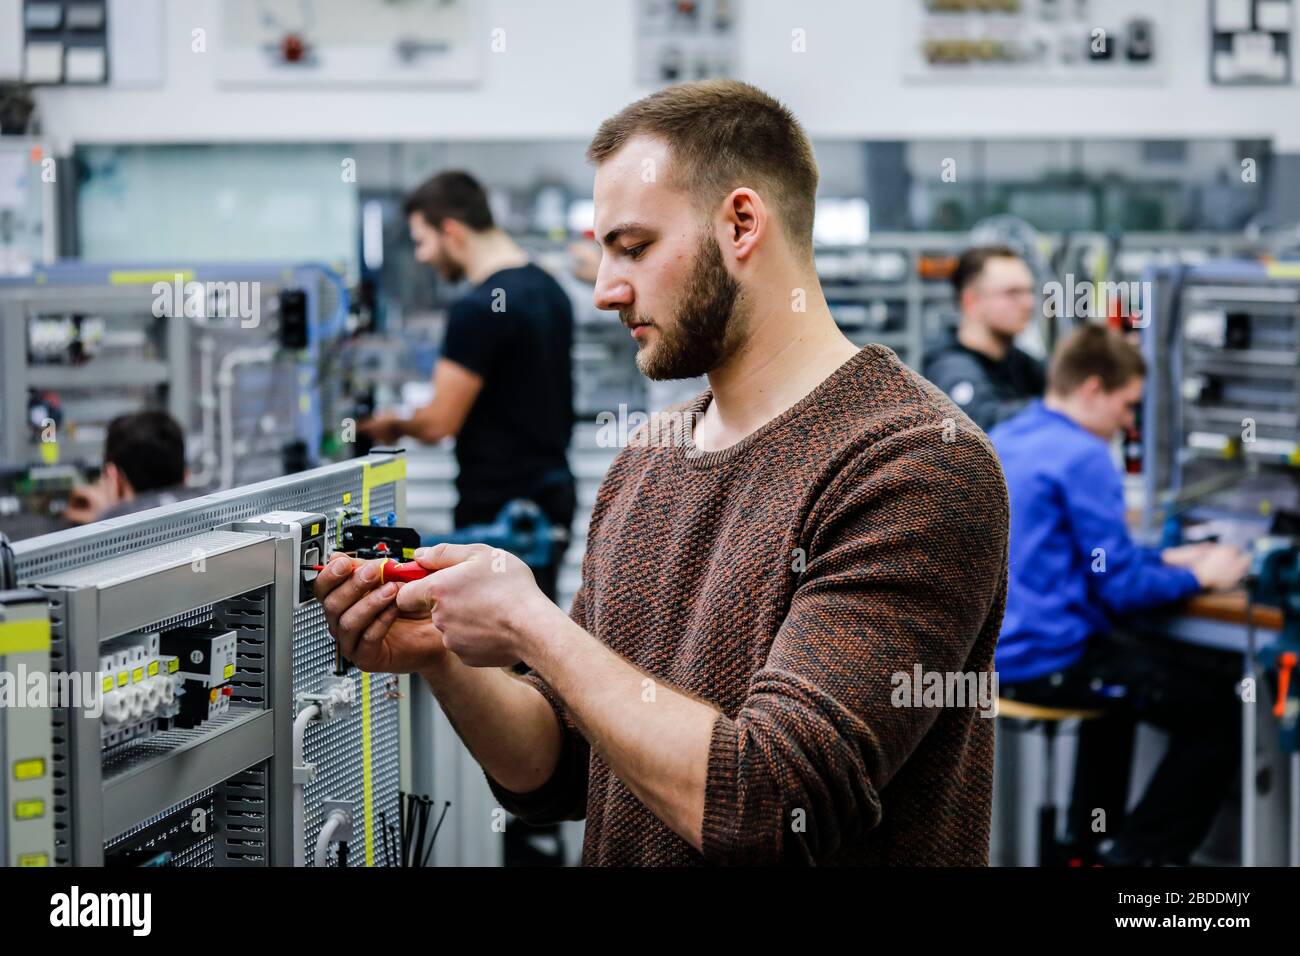 12.02.2020, Remscheid, North Rhine-Westphalia, Germany - Trainees in electrical professions, an industrial electrician assembles a circuit, vocational Stock Photo